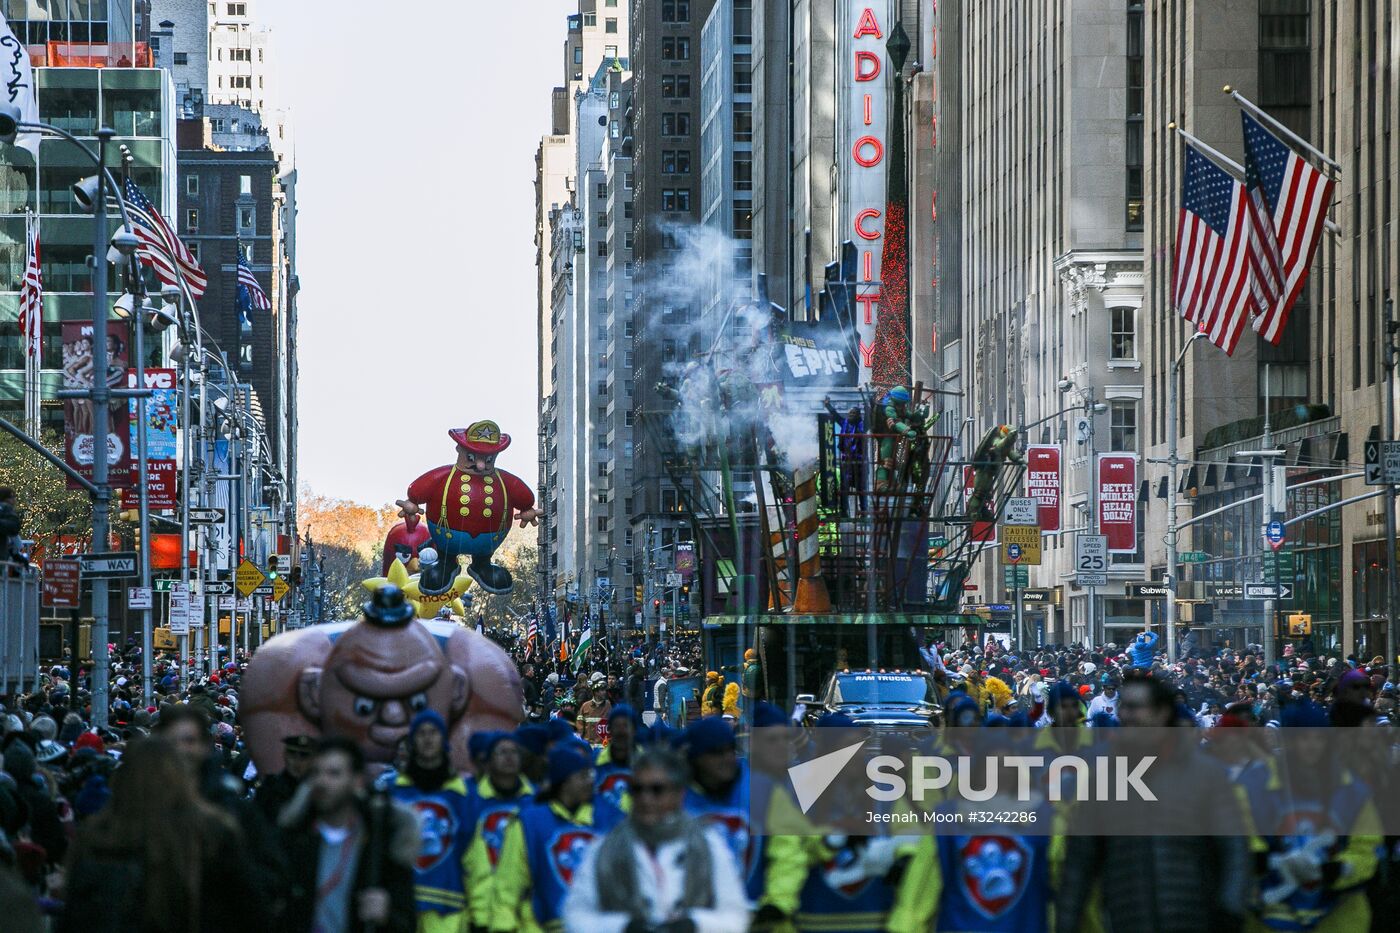 Macy's Thanksgiving Day Parade in NYC